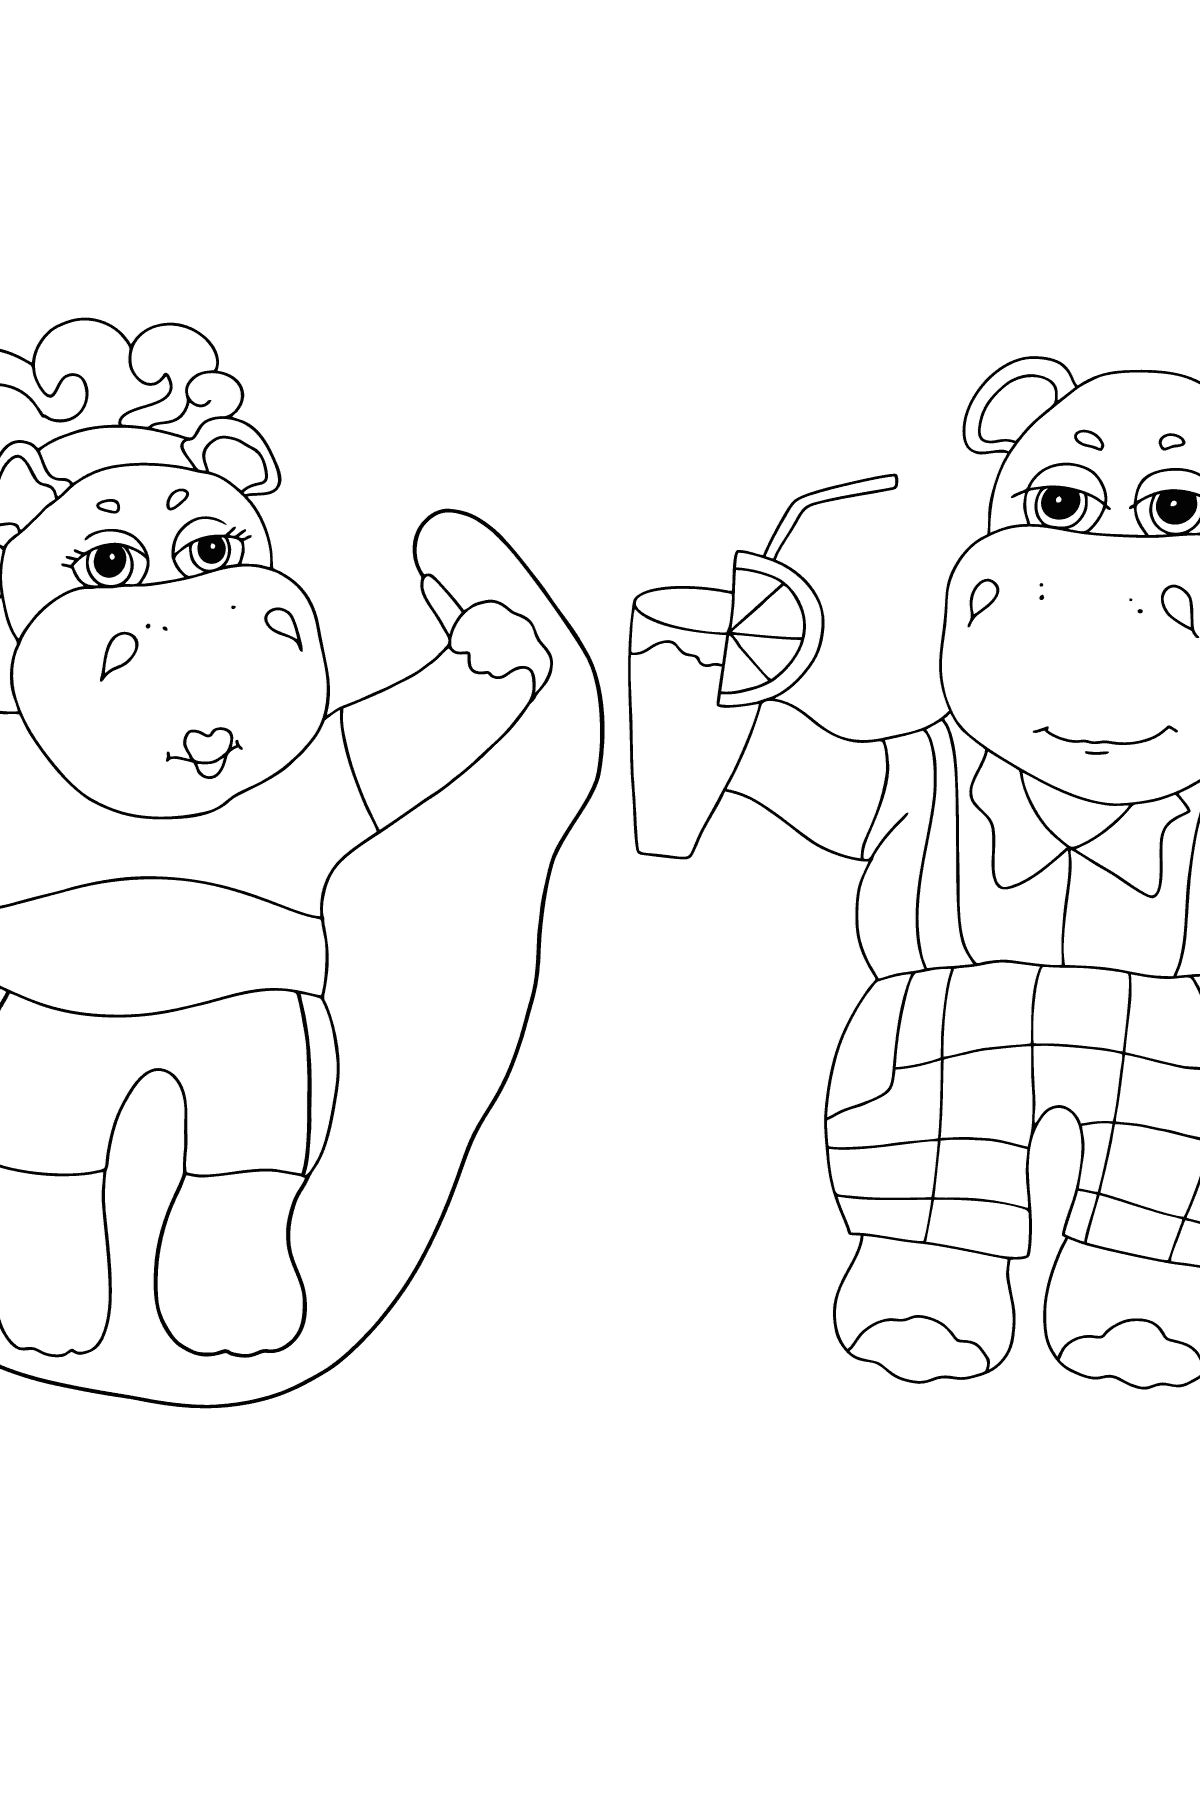 Good Hippopotam (difficult) coloring page - Coloring Pages for Kids